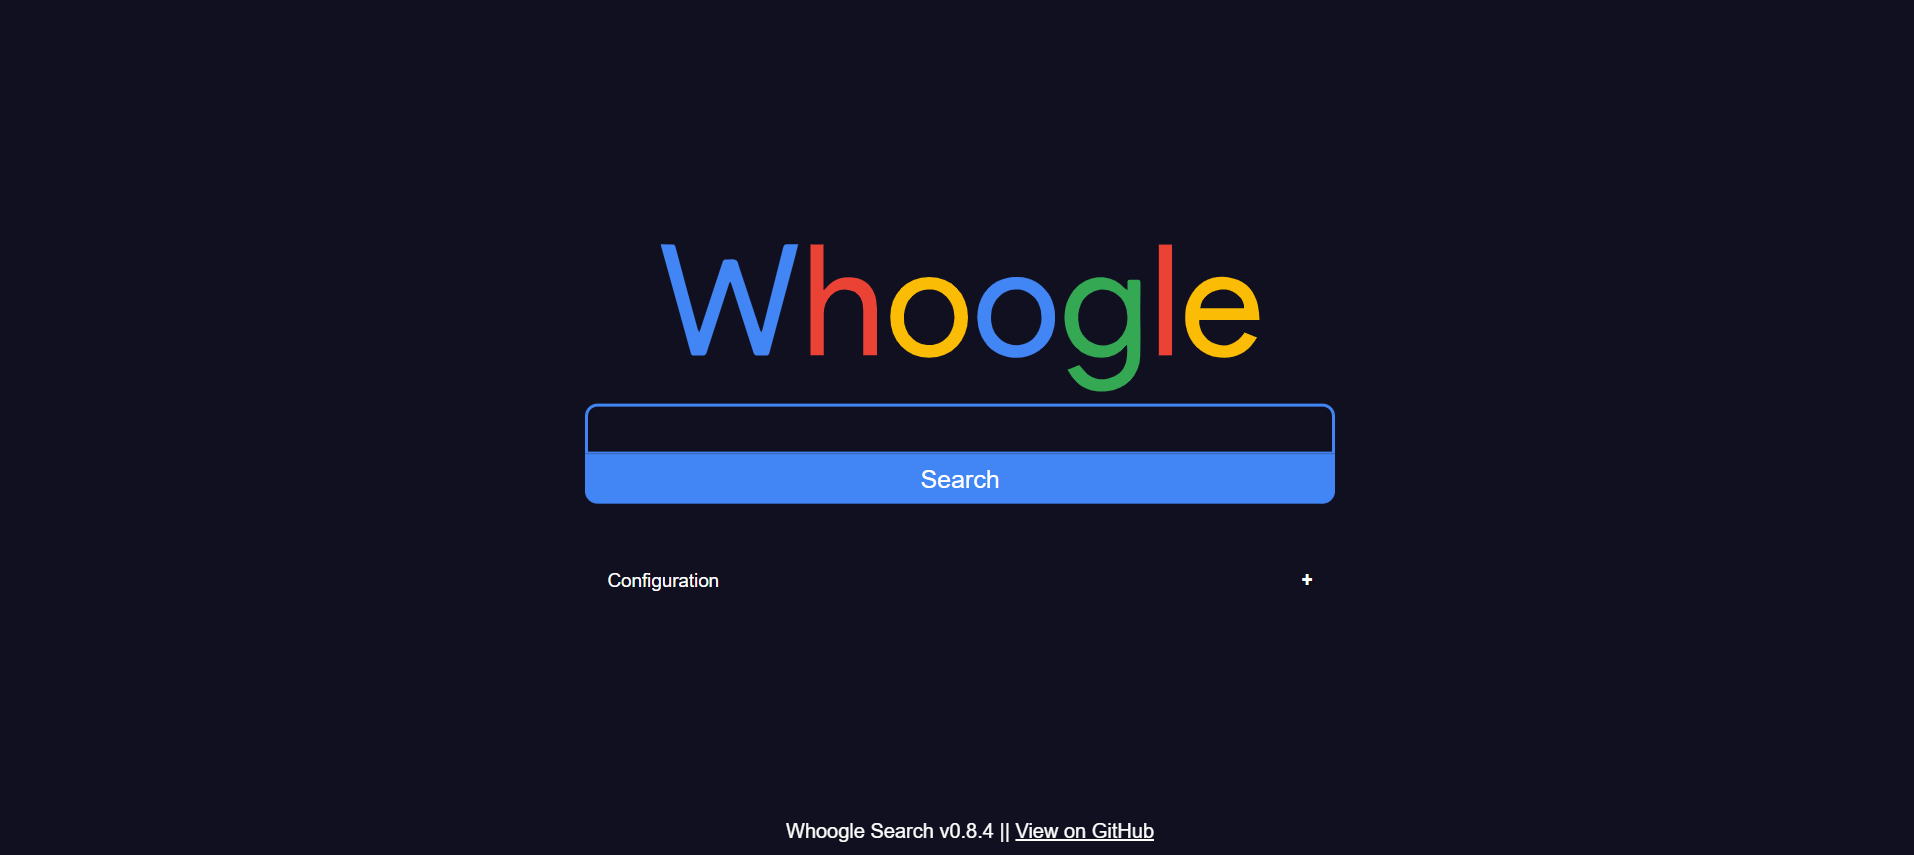 Whoogle - Unleash the Power of Google Without Compromising Privacy